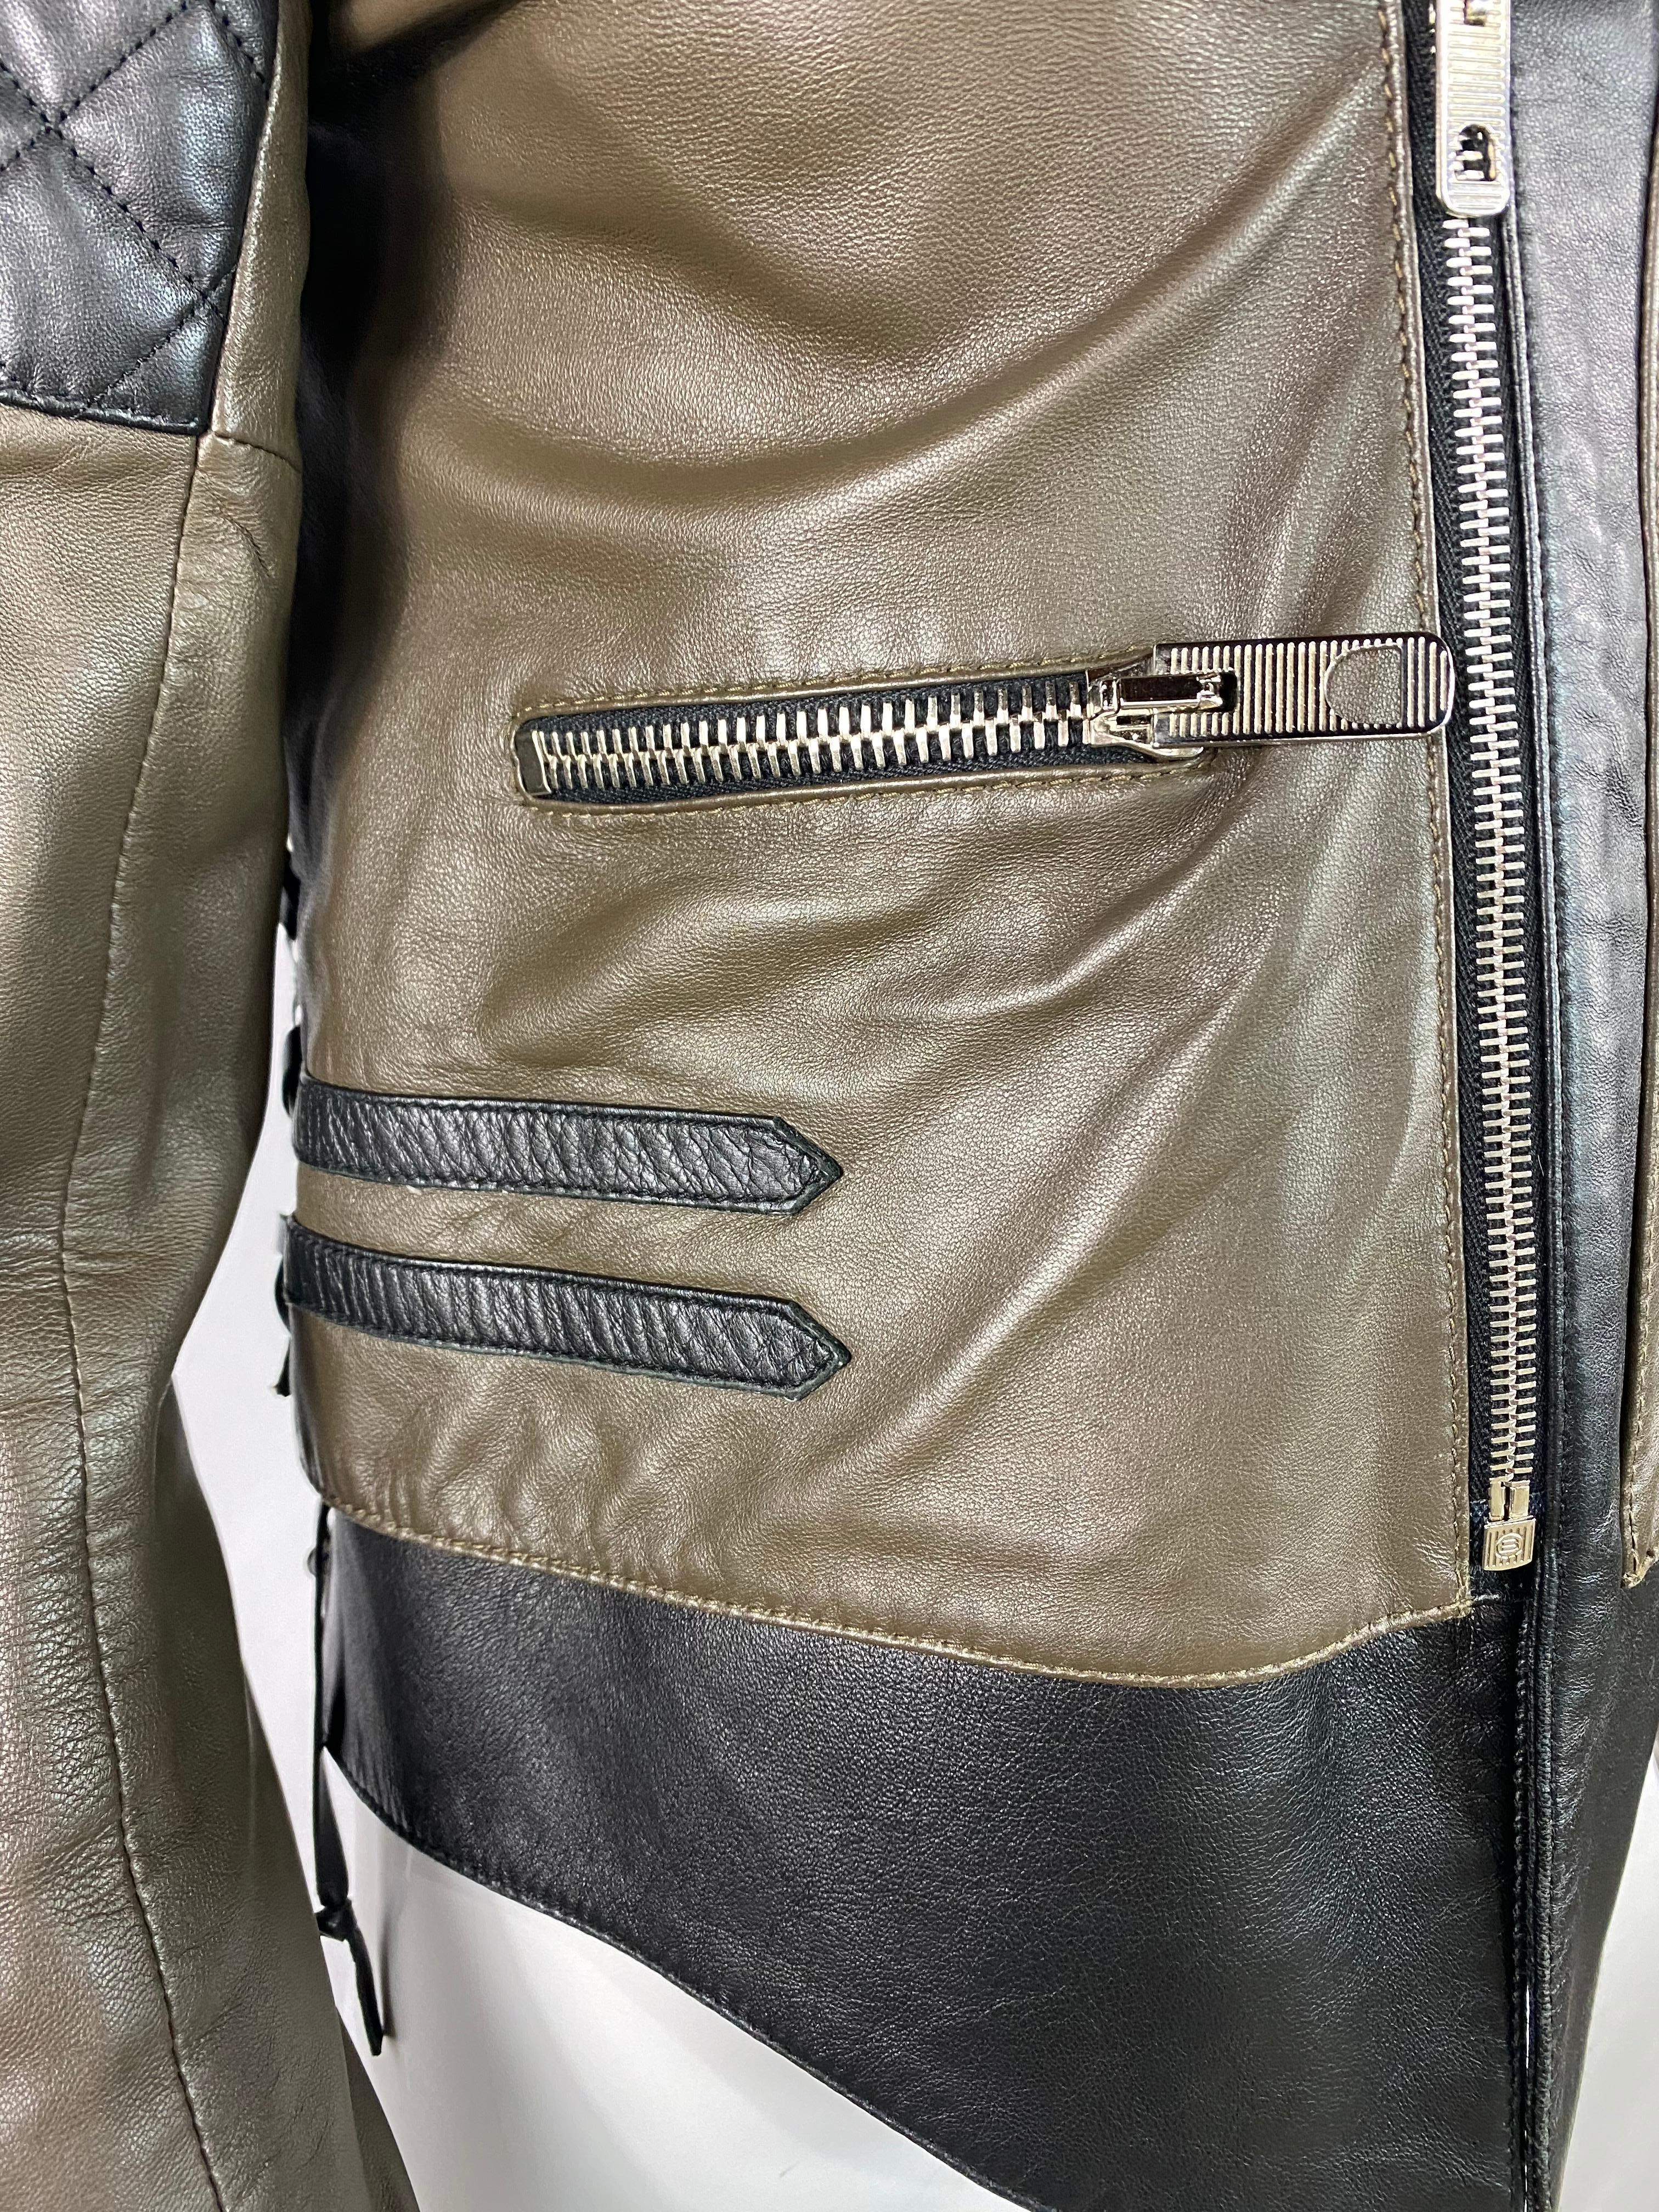 Product details:

The jacket is designed by Balenciaga, it is made out of 100% lamb leather with double rayon lining. It features silver tone hardware, front zip closure, front pockets with zipper closure, side black leather crossed laces, zipper